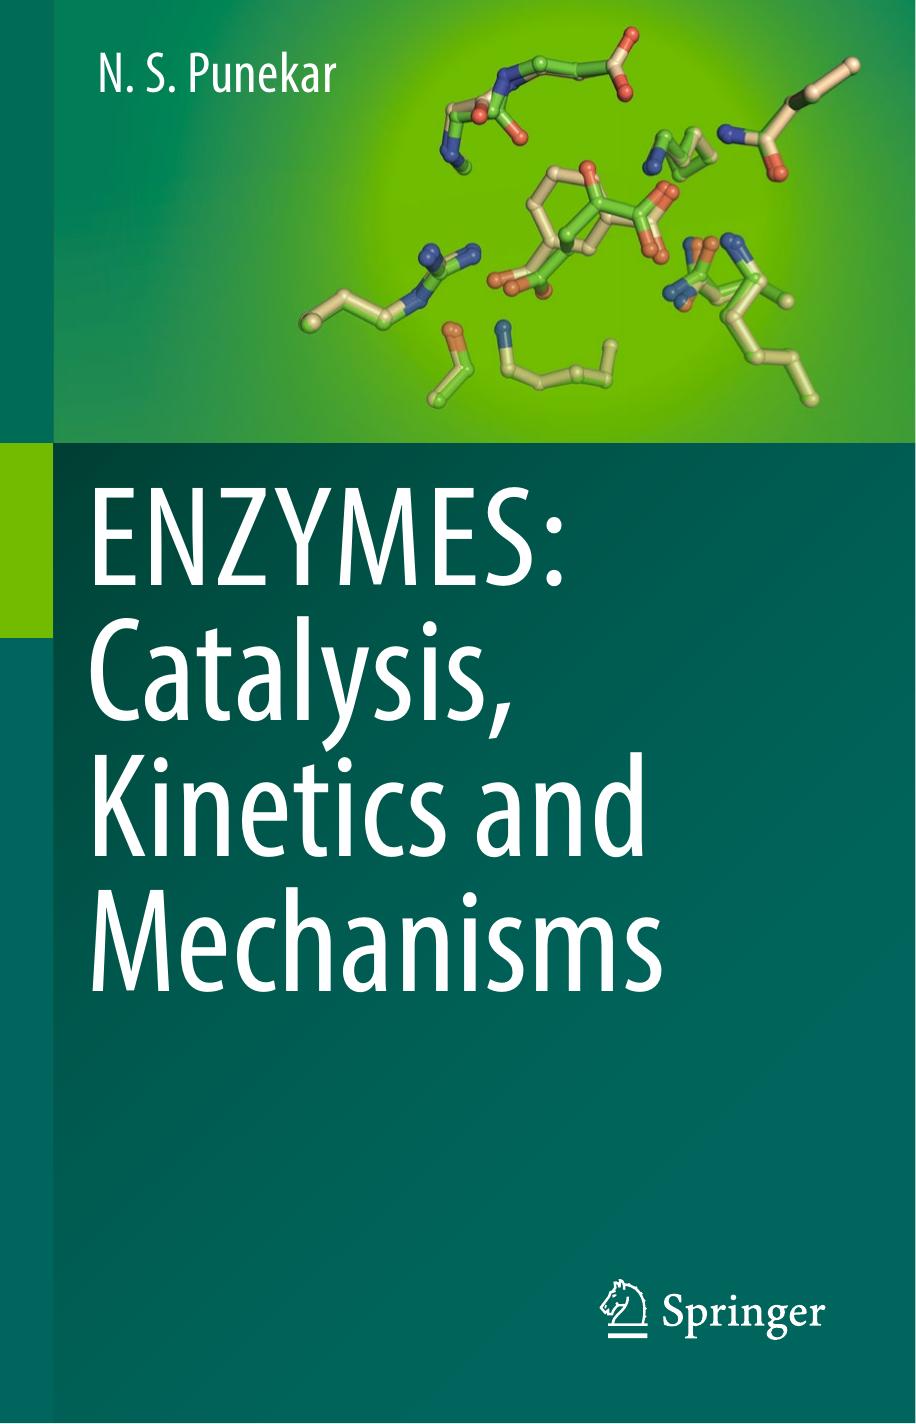 ENZYMES  Catalysis, Kinetics and Mechanisms 2016